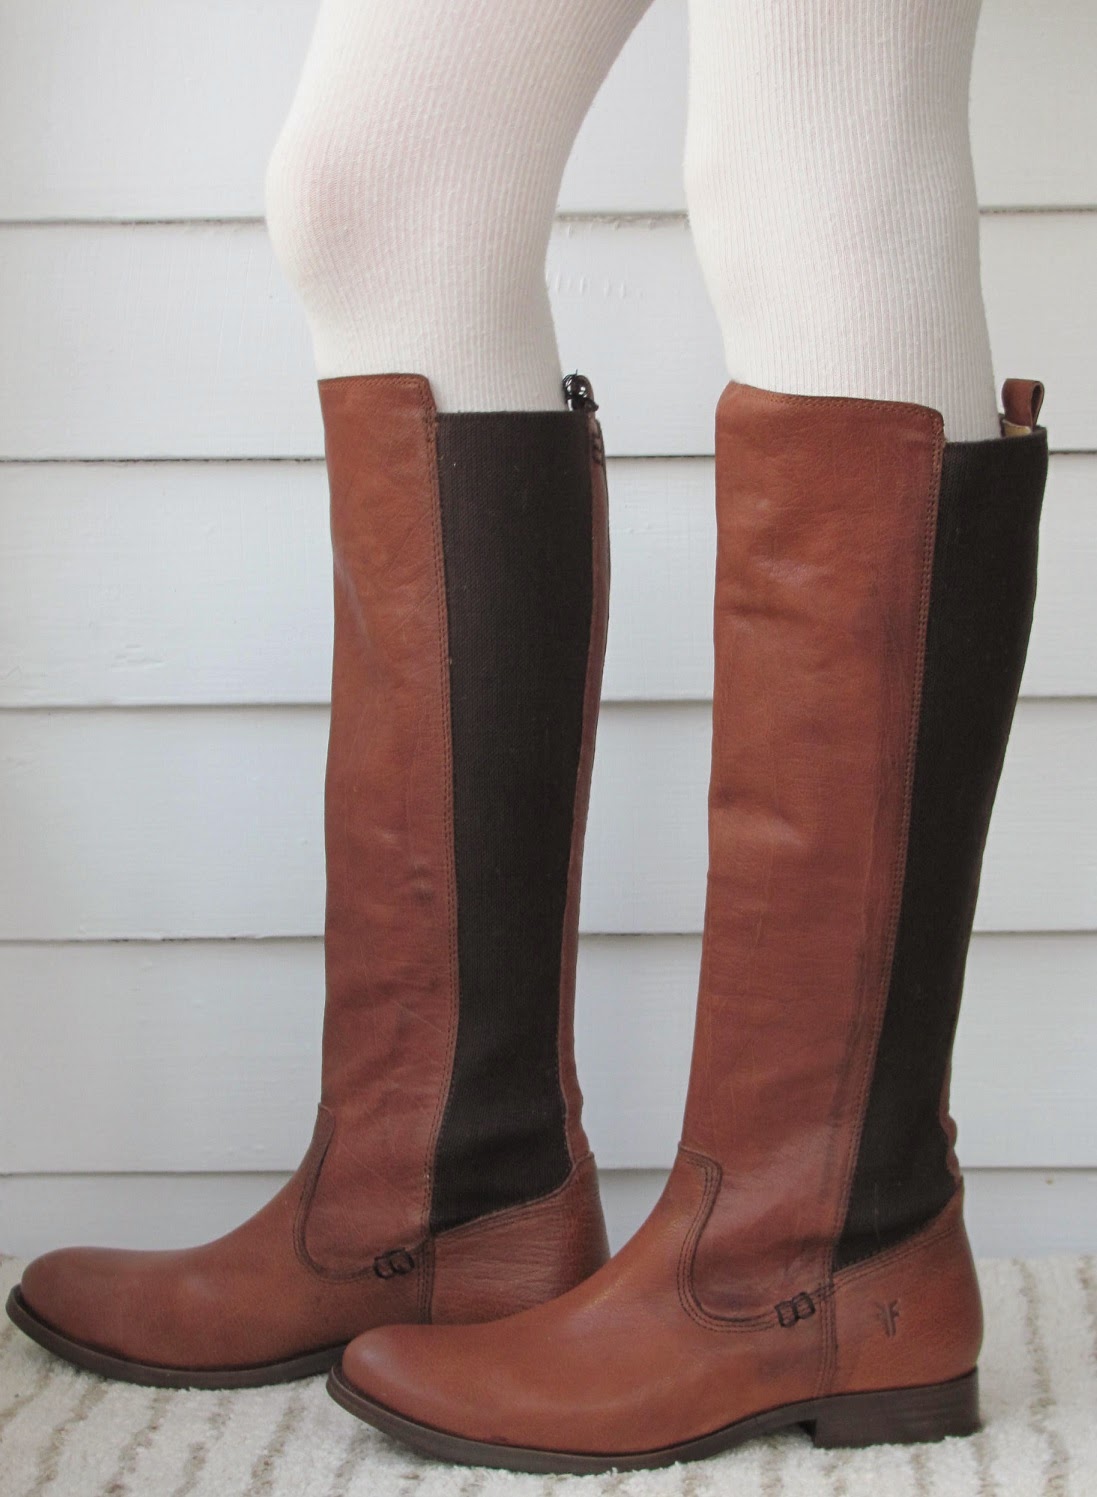 Howdy Slim! Riding Boots for Thin Calves: Frye Molly Gore Tall